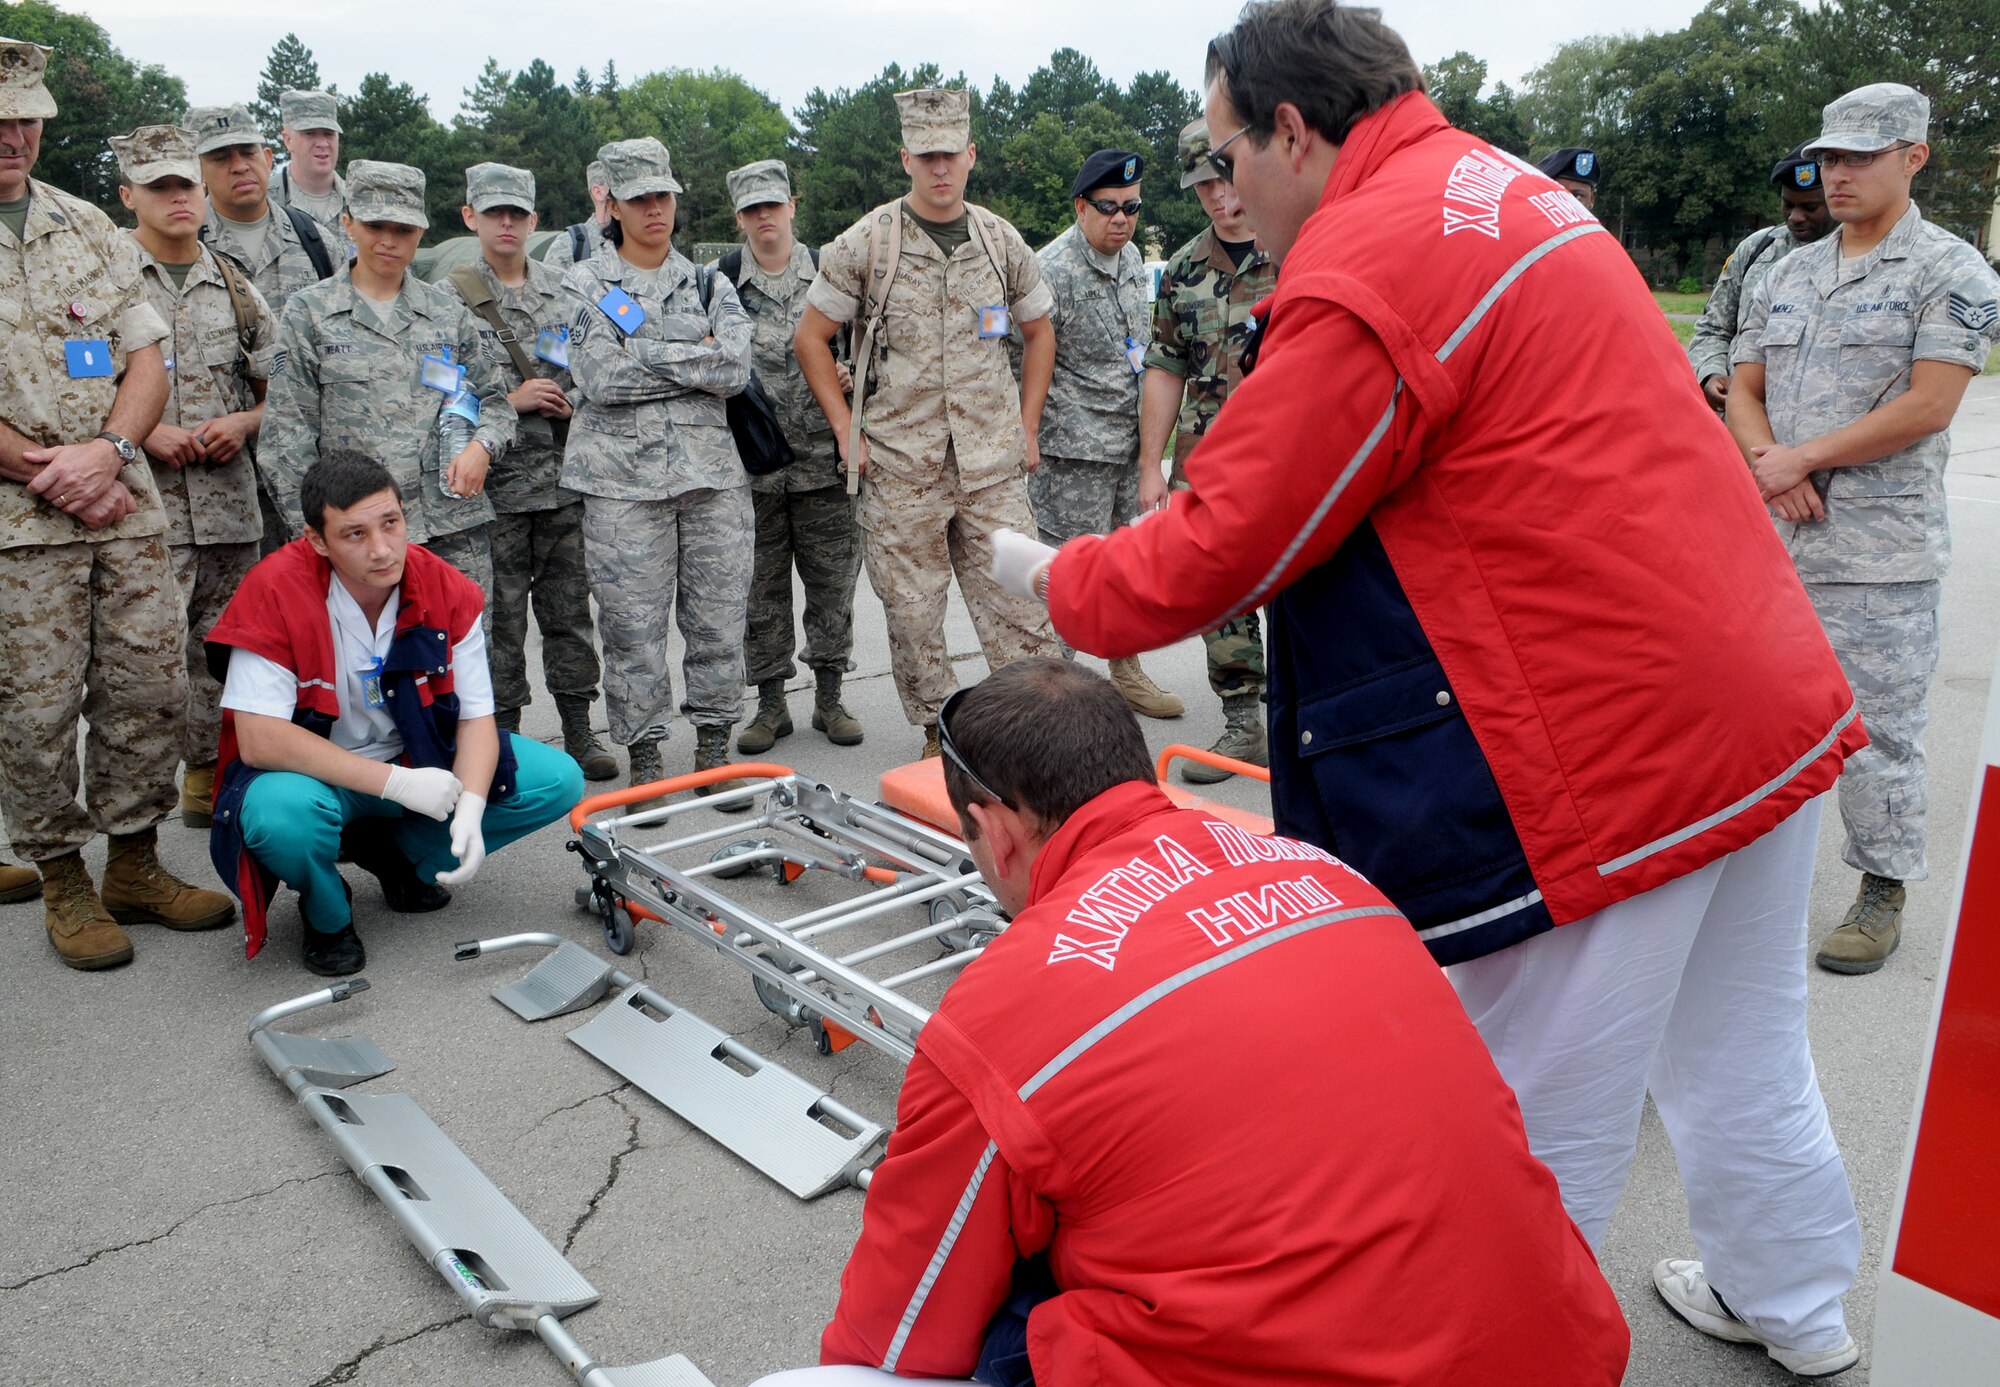 Serbian Red Cross members explain medical evacuation procedures to U.S. troops during an exercise orientation Tuesday, Sept. 8, 2009, in Nis, Serbia. The Serbian Red Cross worked alongside a U.S. mobile hospital housing the 458th Expeditionary Medical Squadron. The 458th EMEDS stood up in support of the 2009 Military Medical Training Exercise in Central and Eastern Europe Sept. 2 – 13. The exercise, hosted by Serbia, provides a joint medical learning environment and assists host nation civilian and military services; international, private and volunteer organizations; and other participating nations in enhancing disaster response actions. Fifteen nations participated in the exercise. (U.S. Air Force Photo/Senior Airman Alex Martinez)